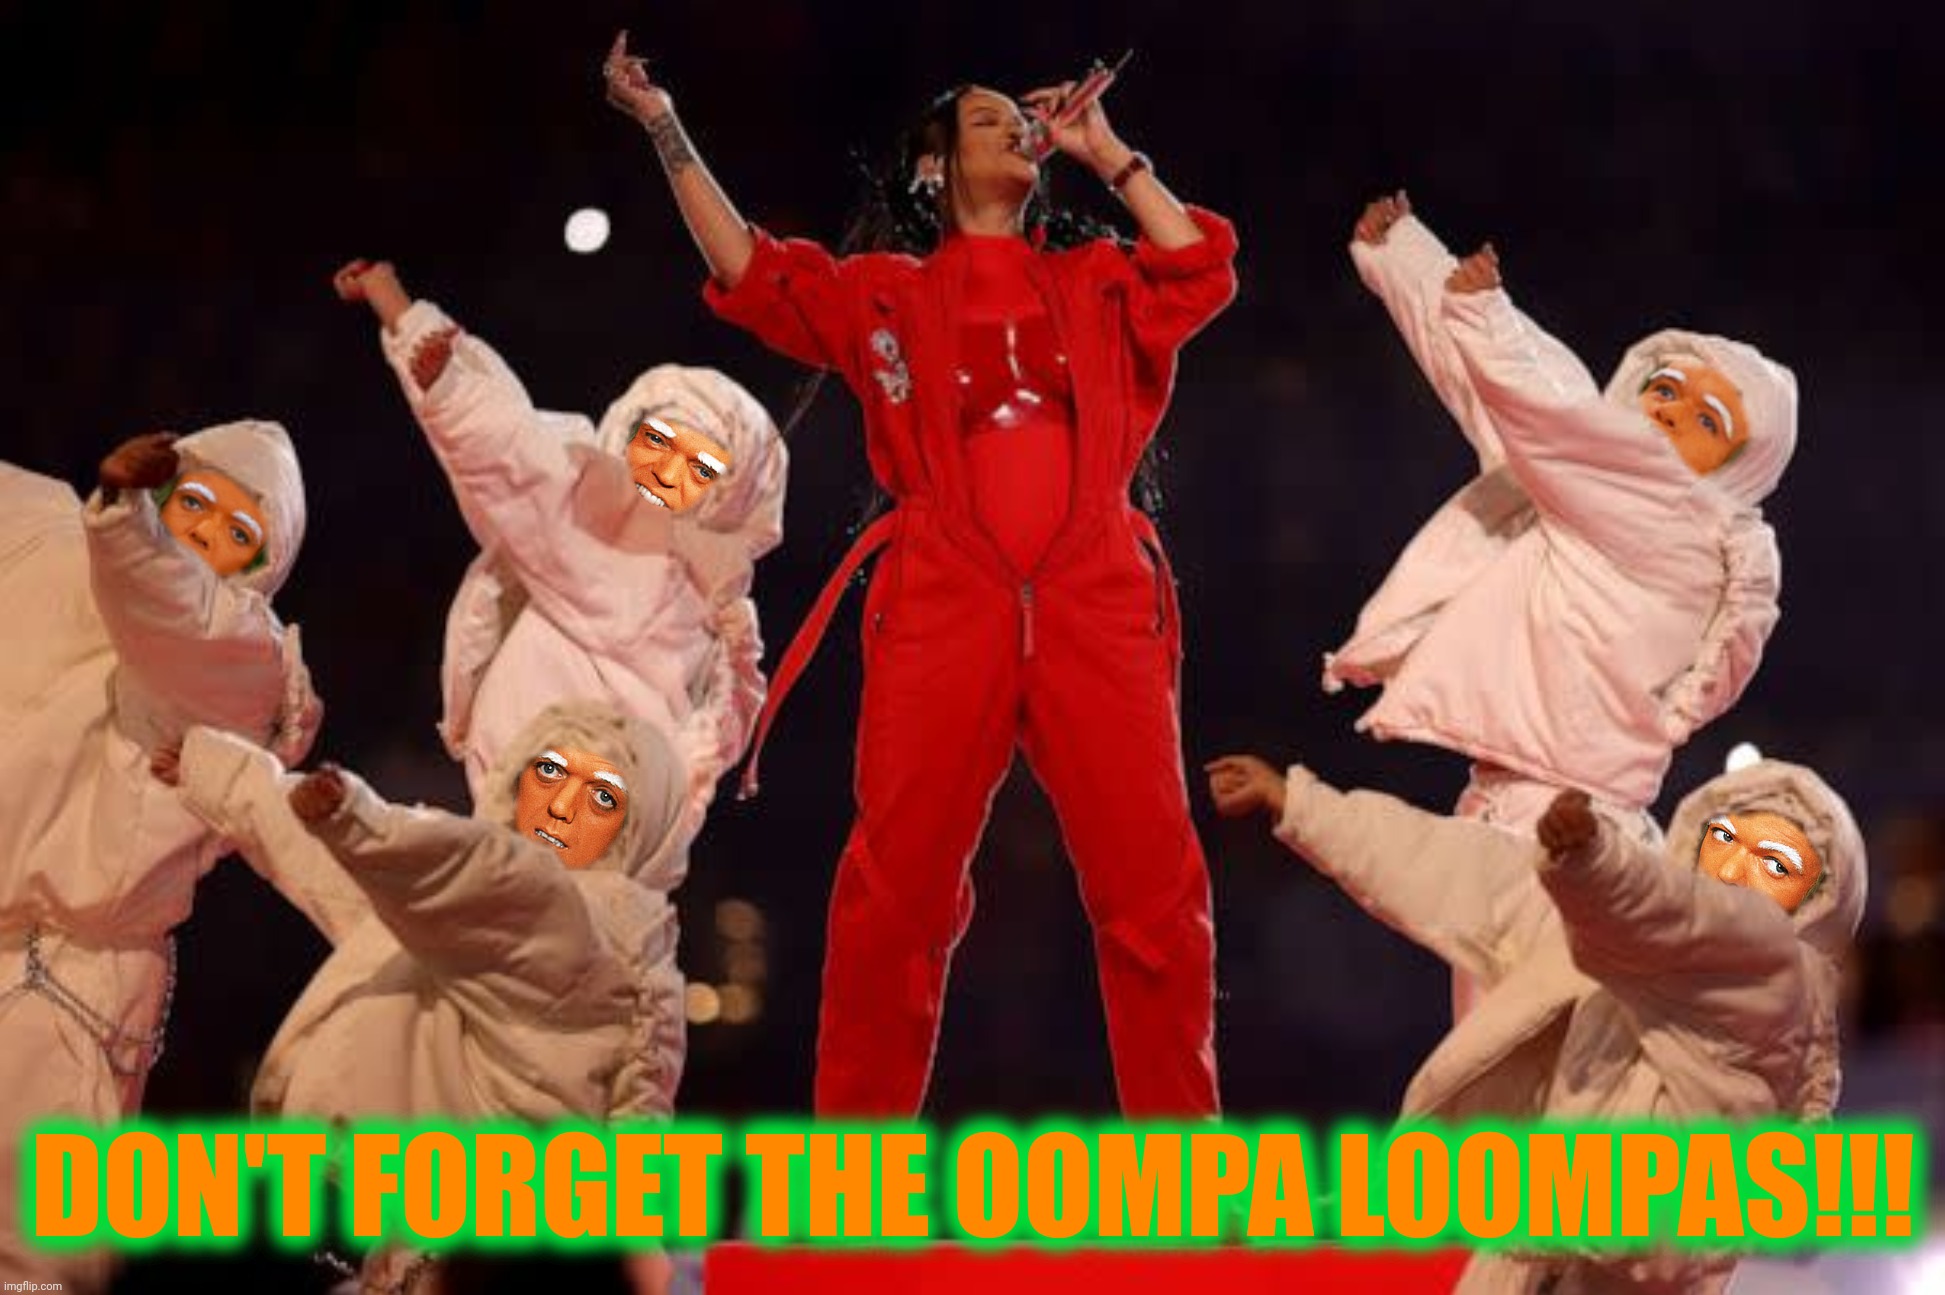 DON'T FORGET THE OOMPA LOOMPAS!!! | made w/ Imgflip meme maker